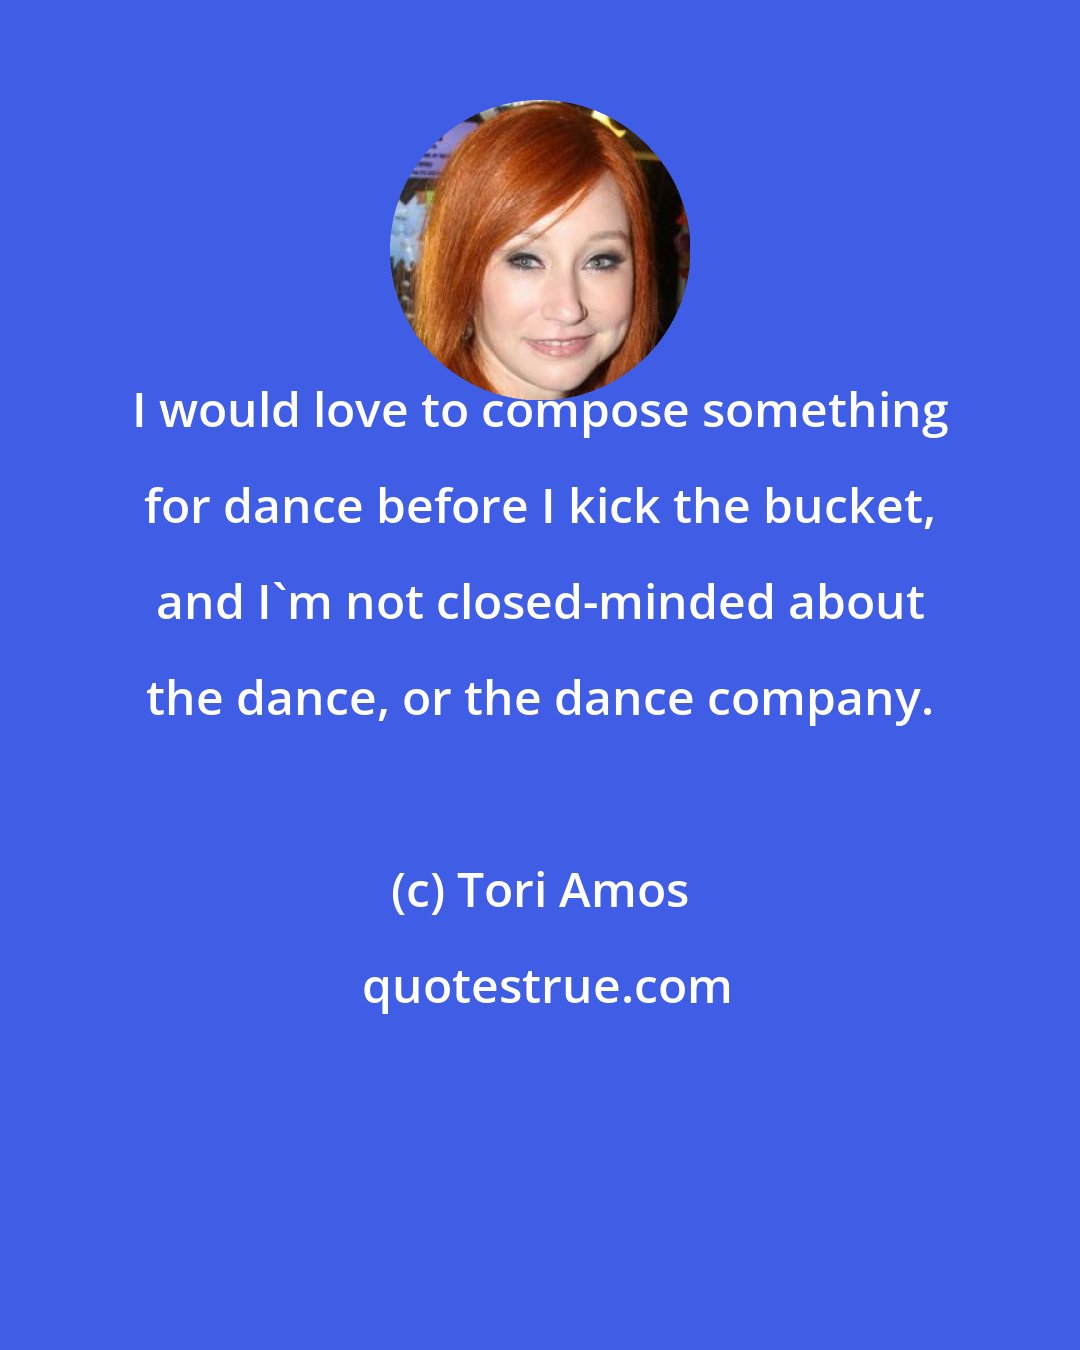 Tori Amos: I would love to compose something for dance before I kick the bucket, and I'm not closed-minded about the dance, or the dance company.